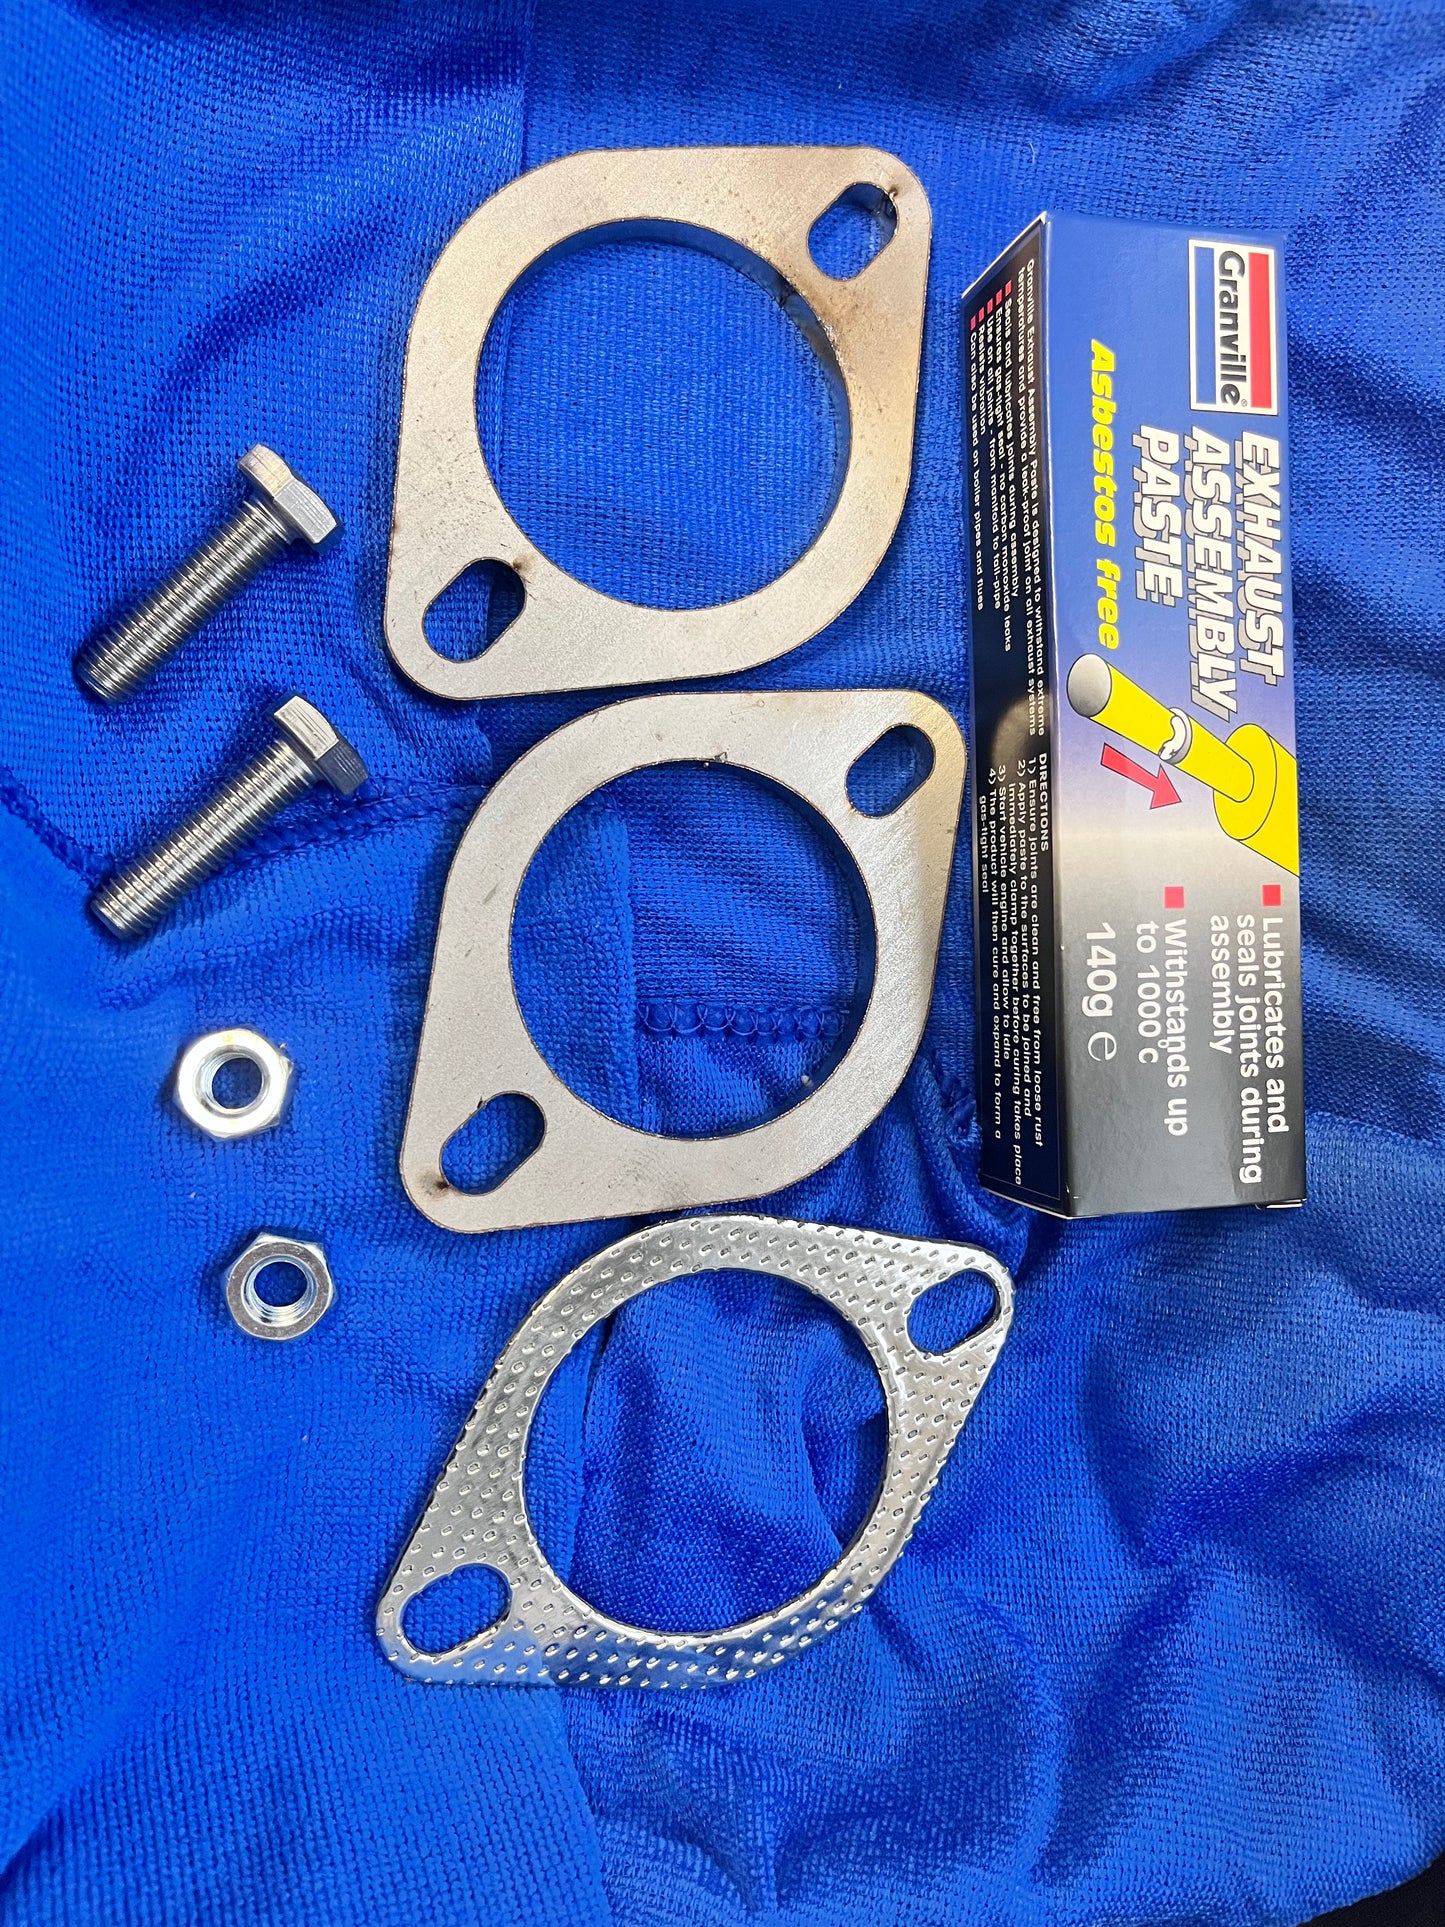 Stainless Steel 2.25" and Gasket Kit with Exhaust Sealant Paste - Pipe Dynamics